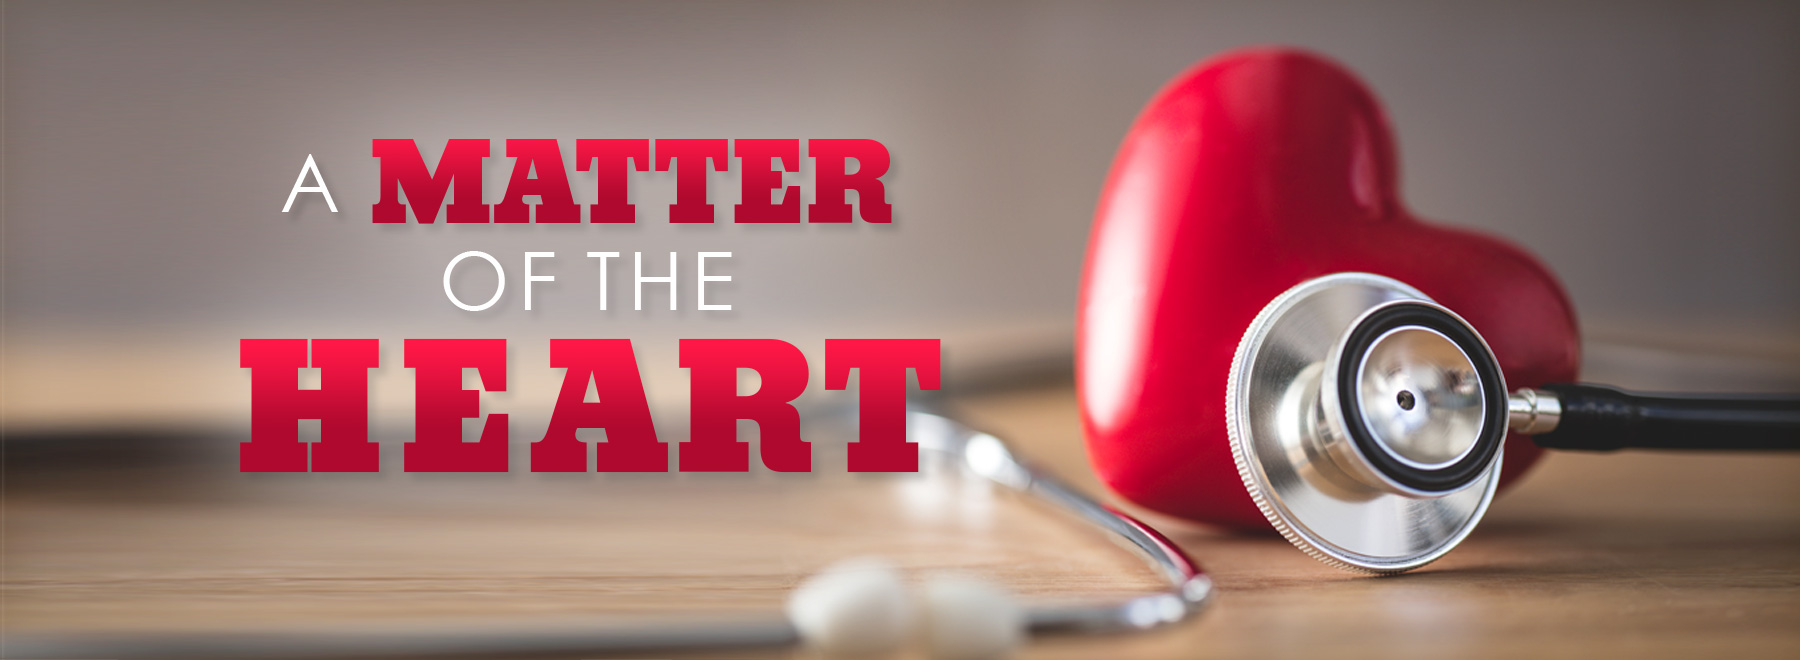 Banner image with plastic heart and stethoscope